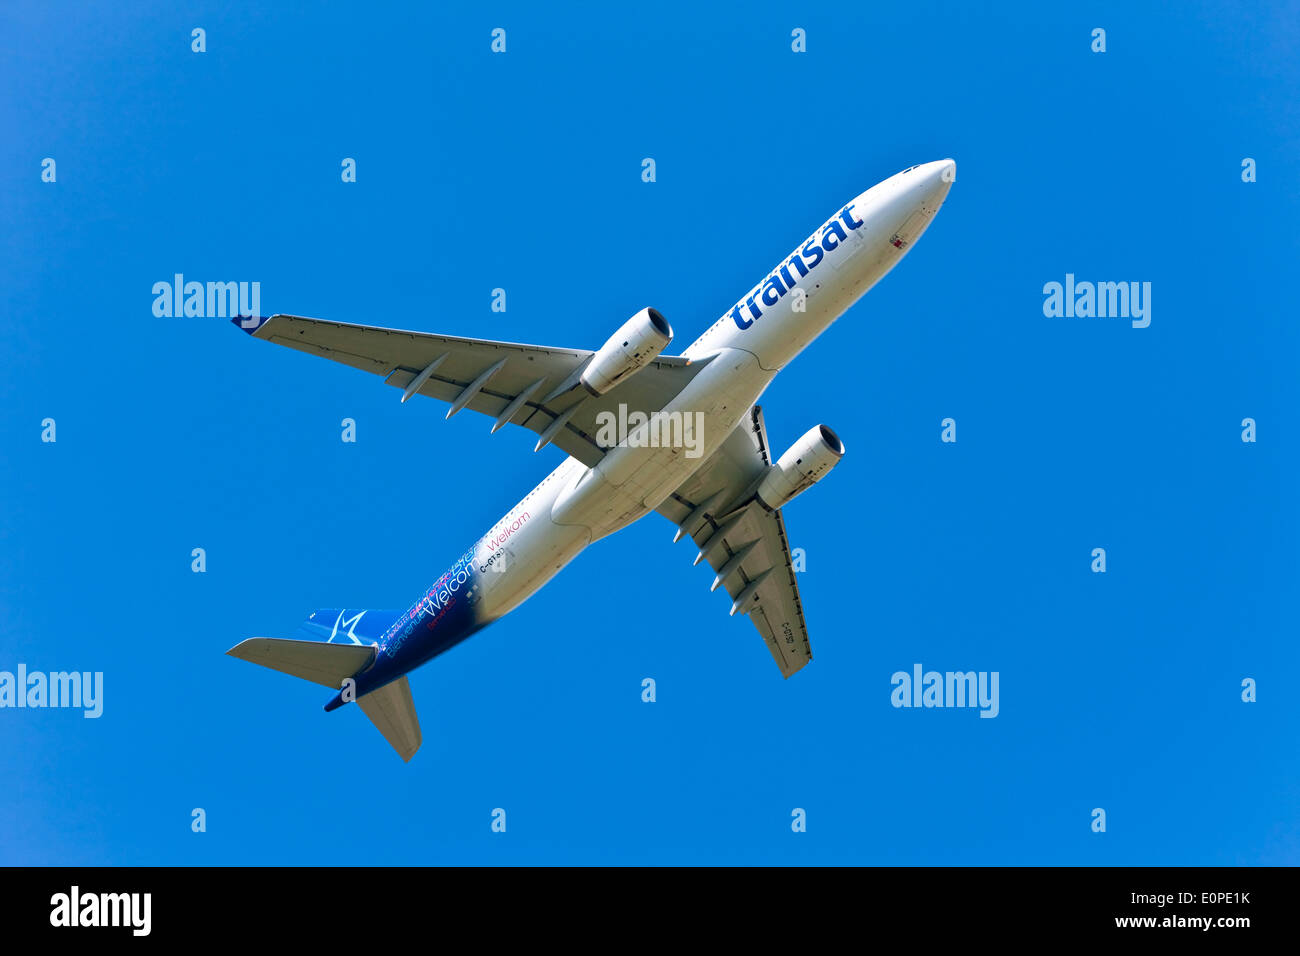 Airbus A330-343 from Air Transat taking off Stock Photo